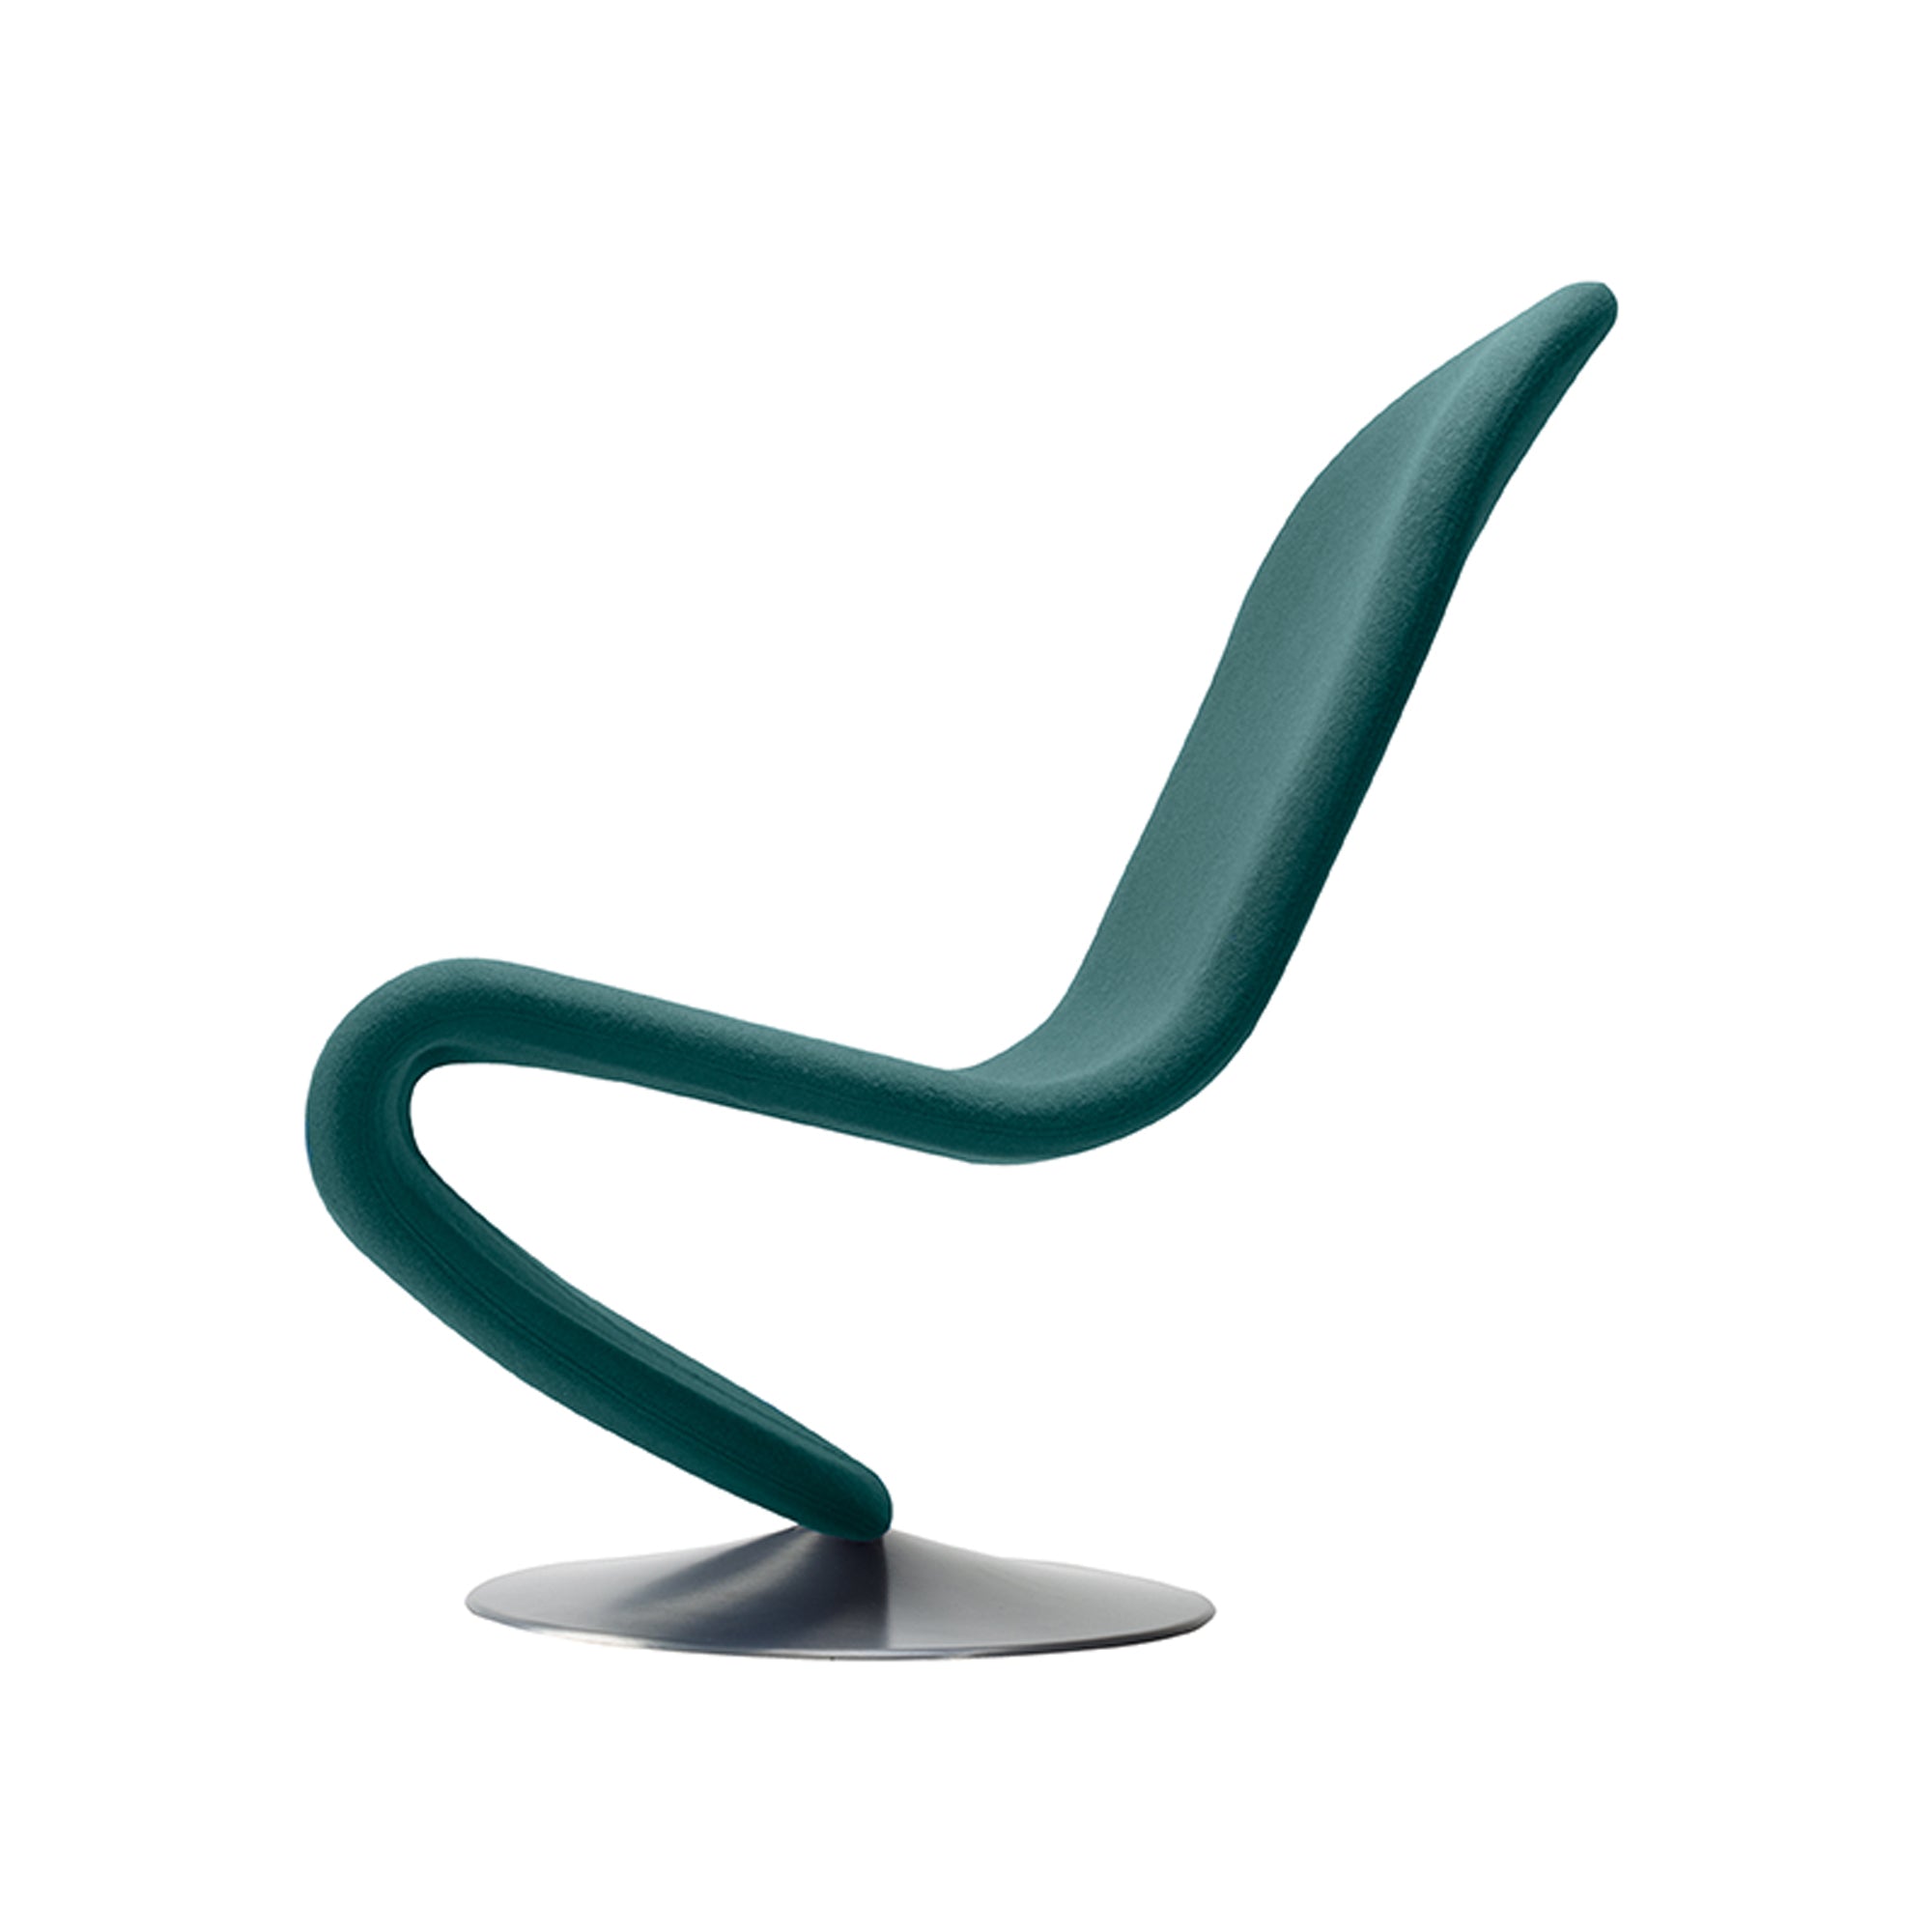 System 1-2-3 Lounge Chair: Standard